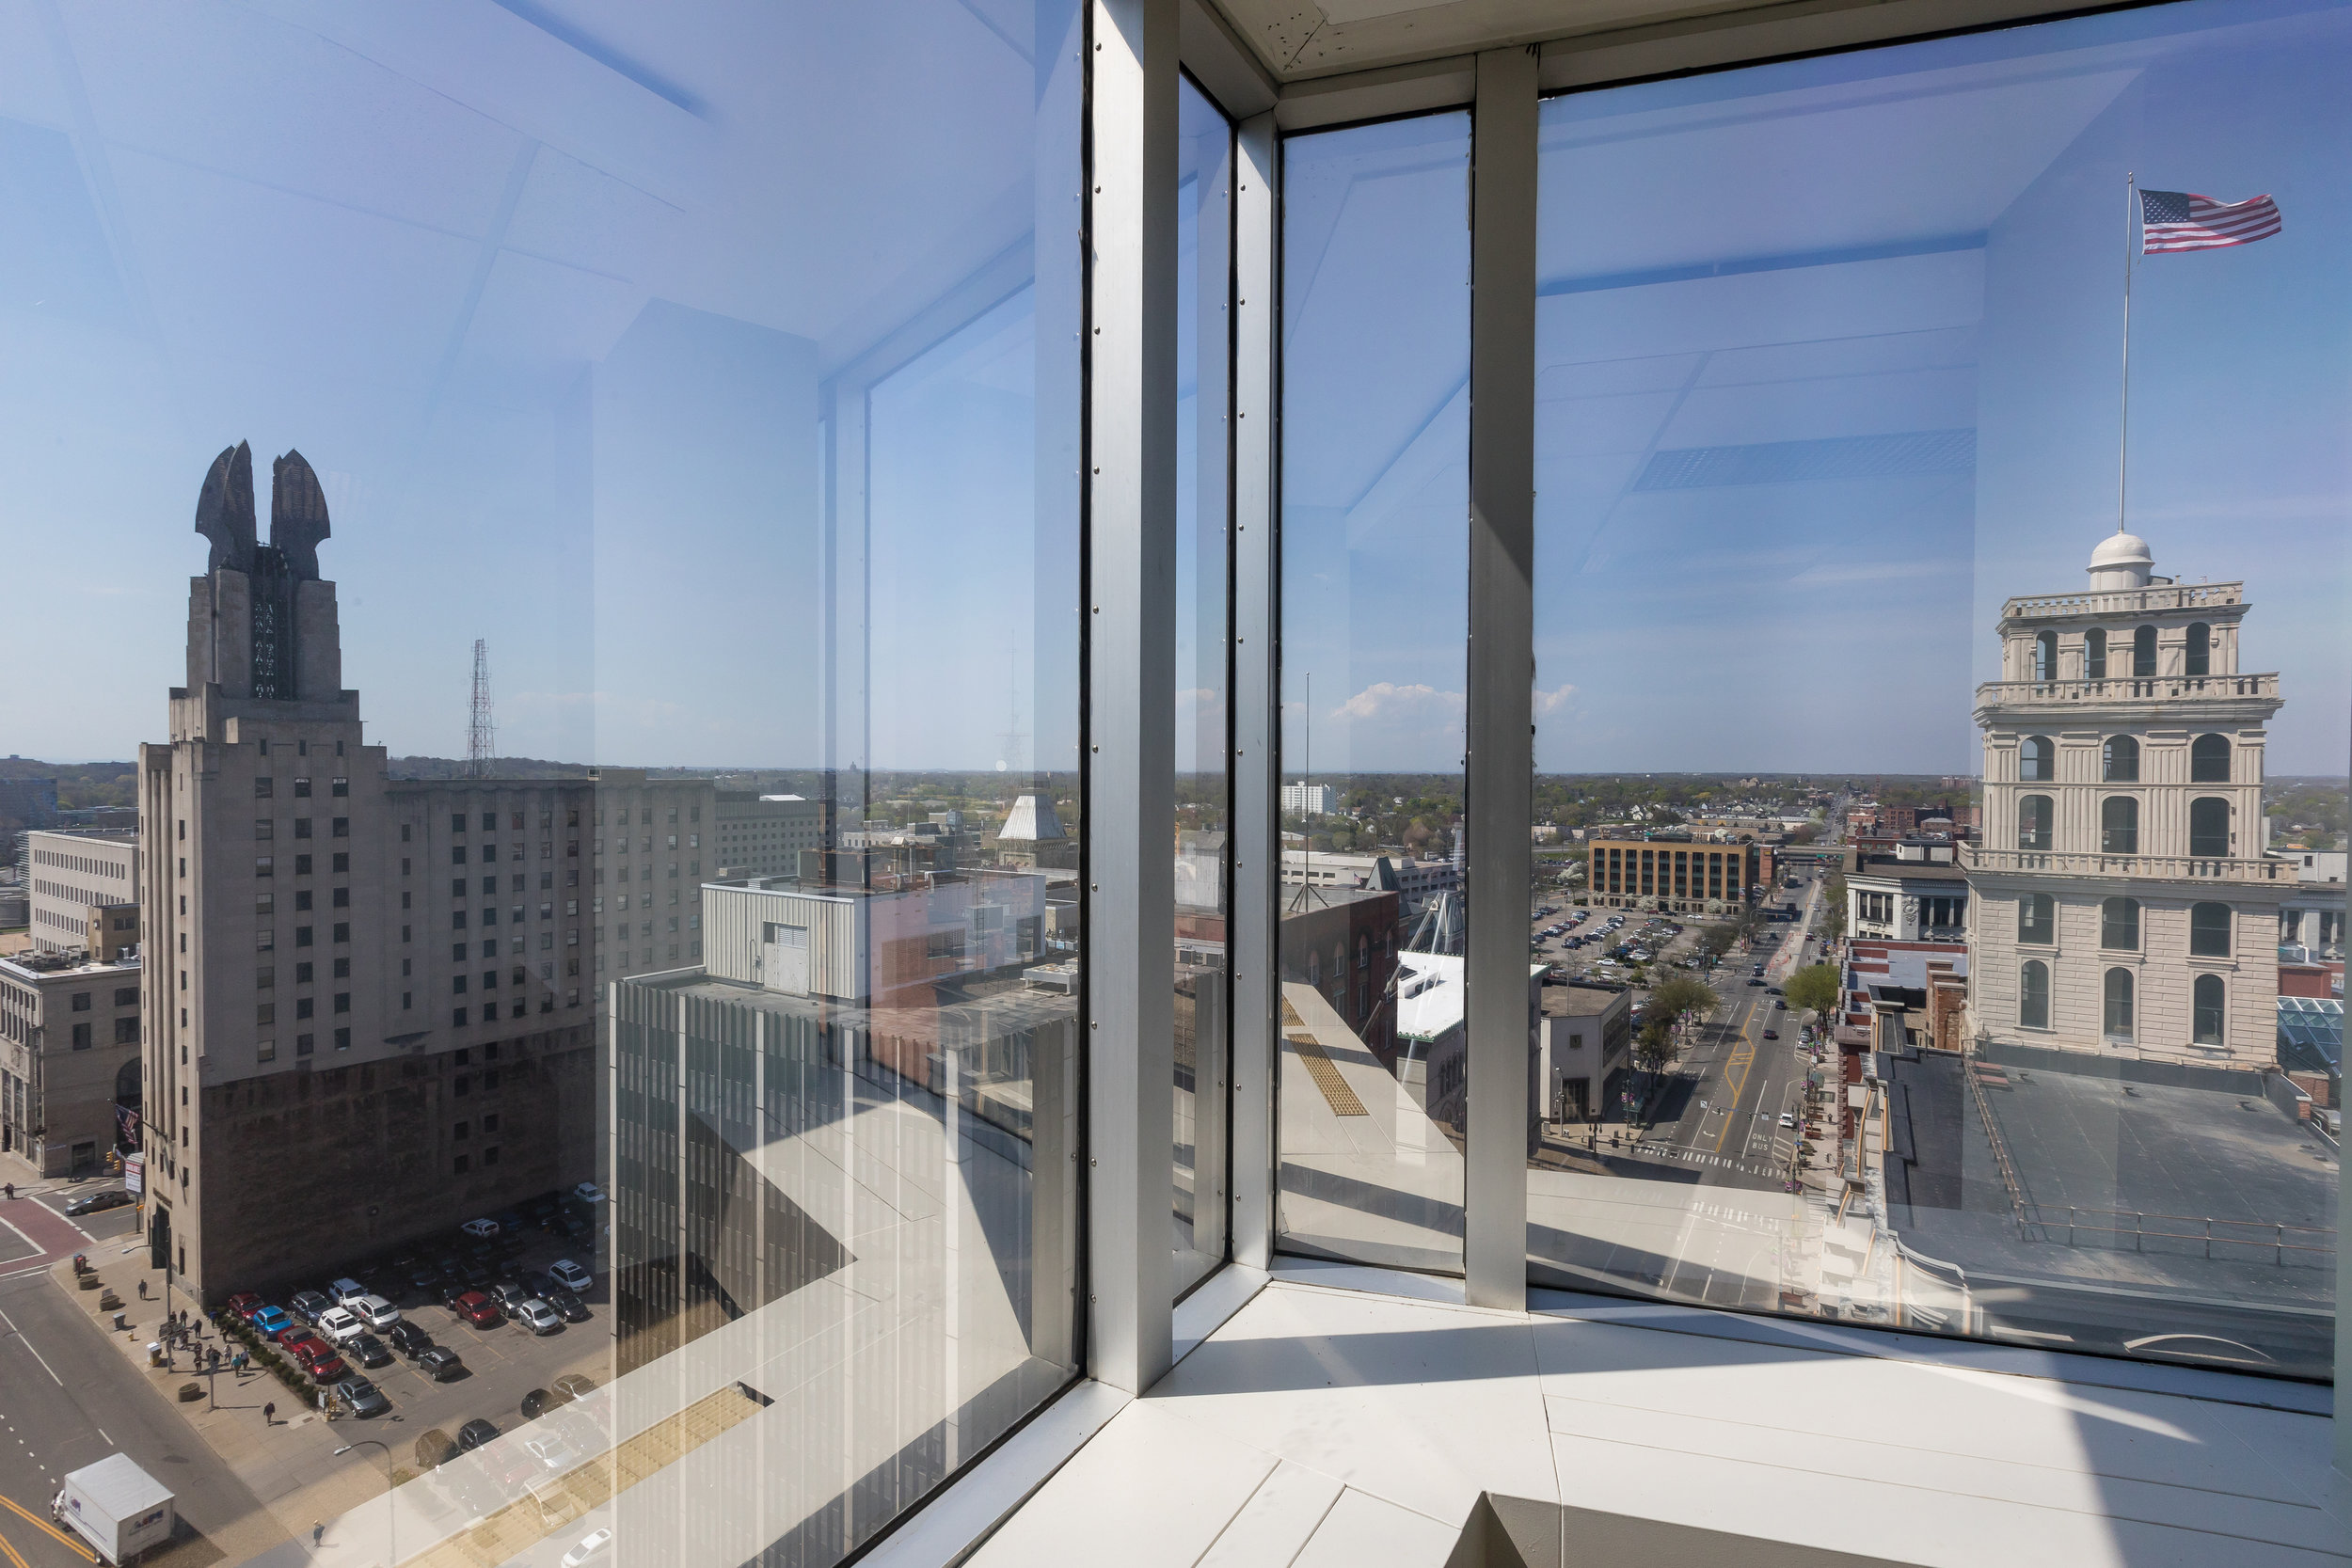 Sweeping views of the Rochester, NY skyline for your office. 